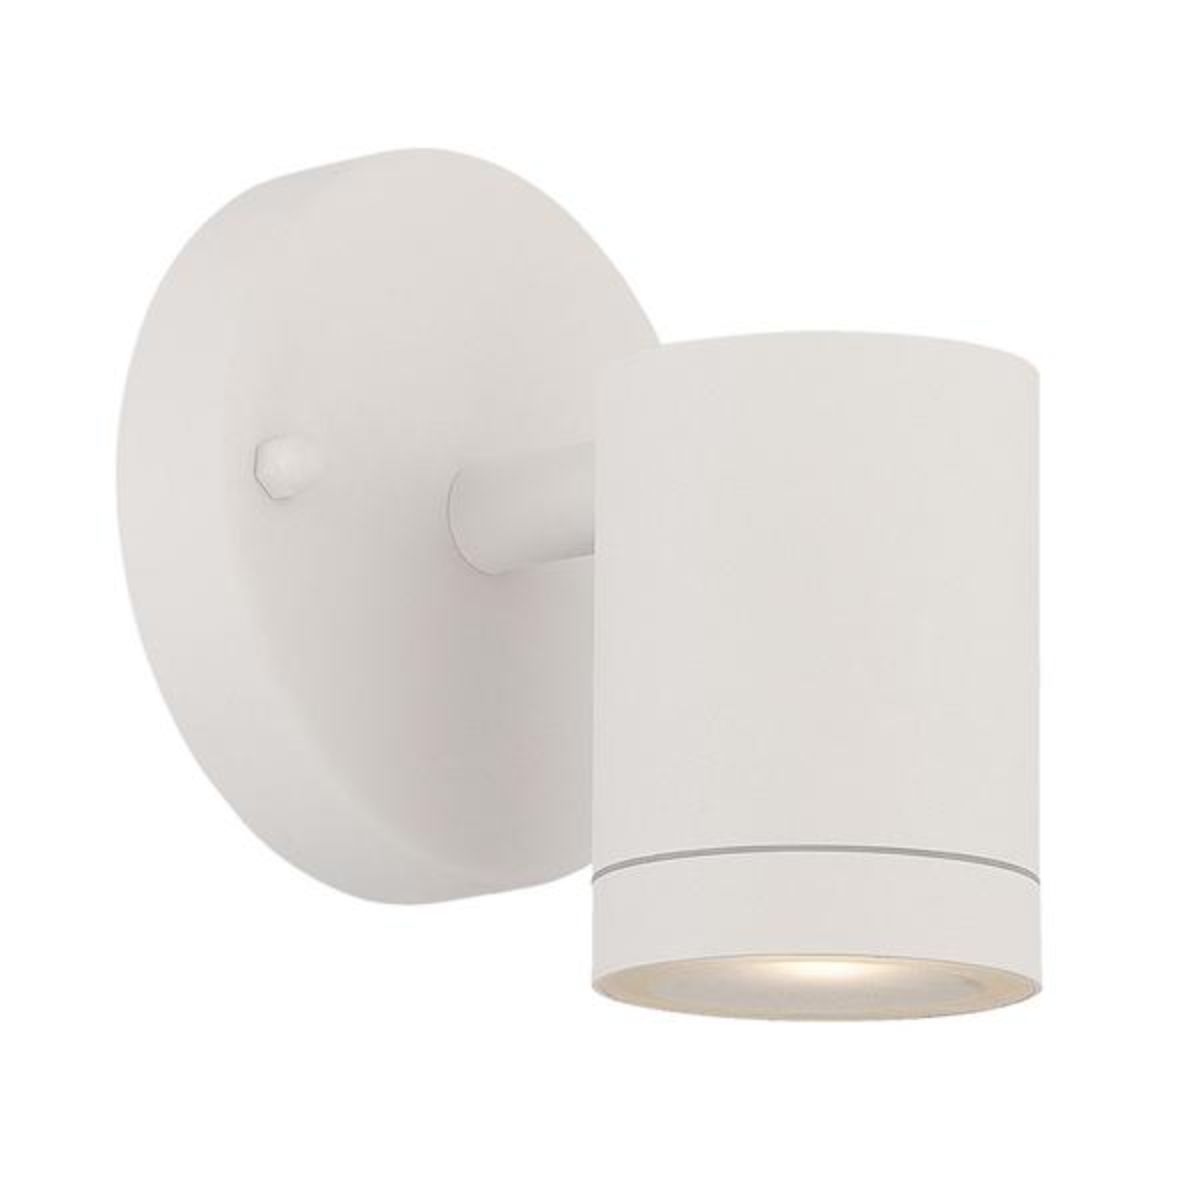 5 In 1 Light LED Outdoor Cylinder Wall Light 3000K White Finish